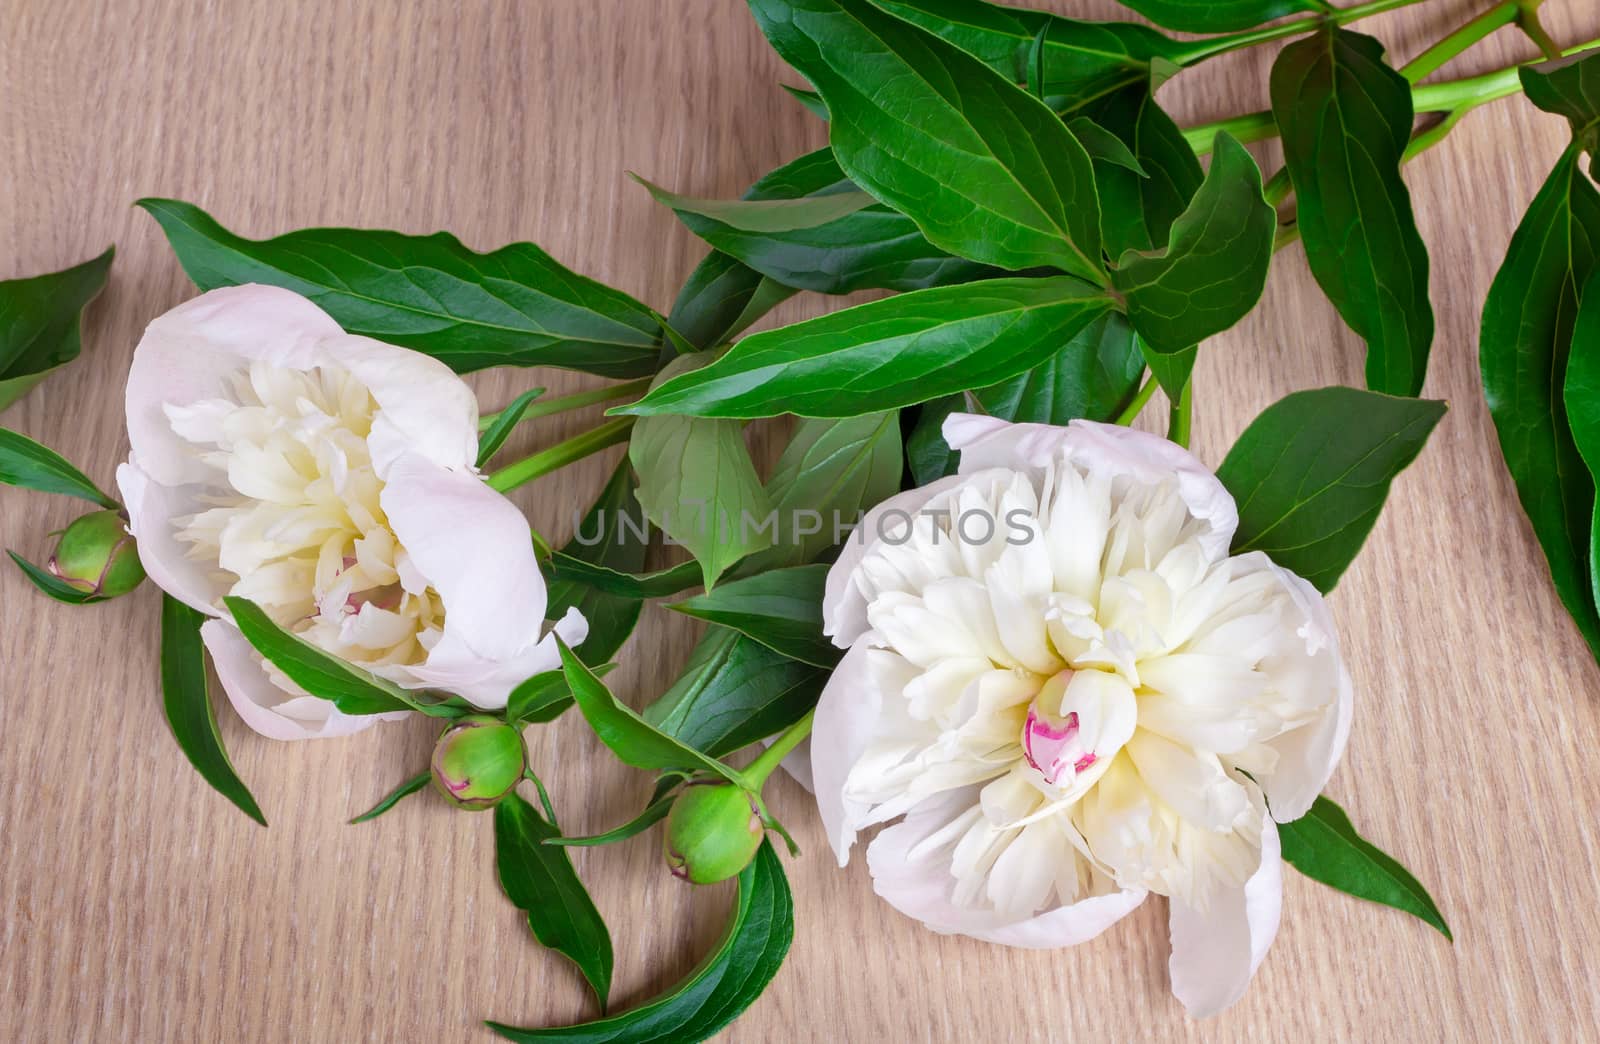 On the table lie two beautiful white peony with green leaves.